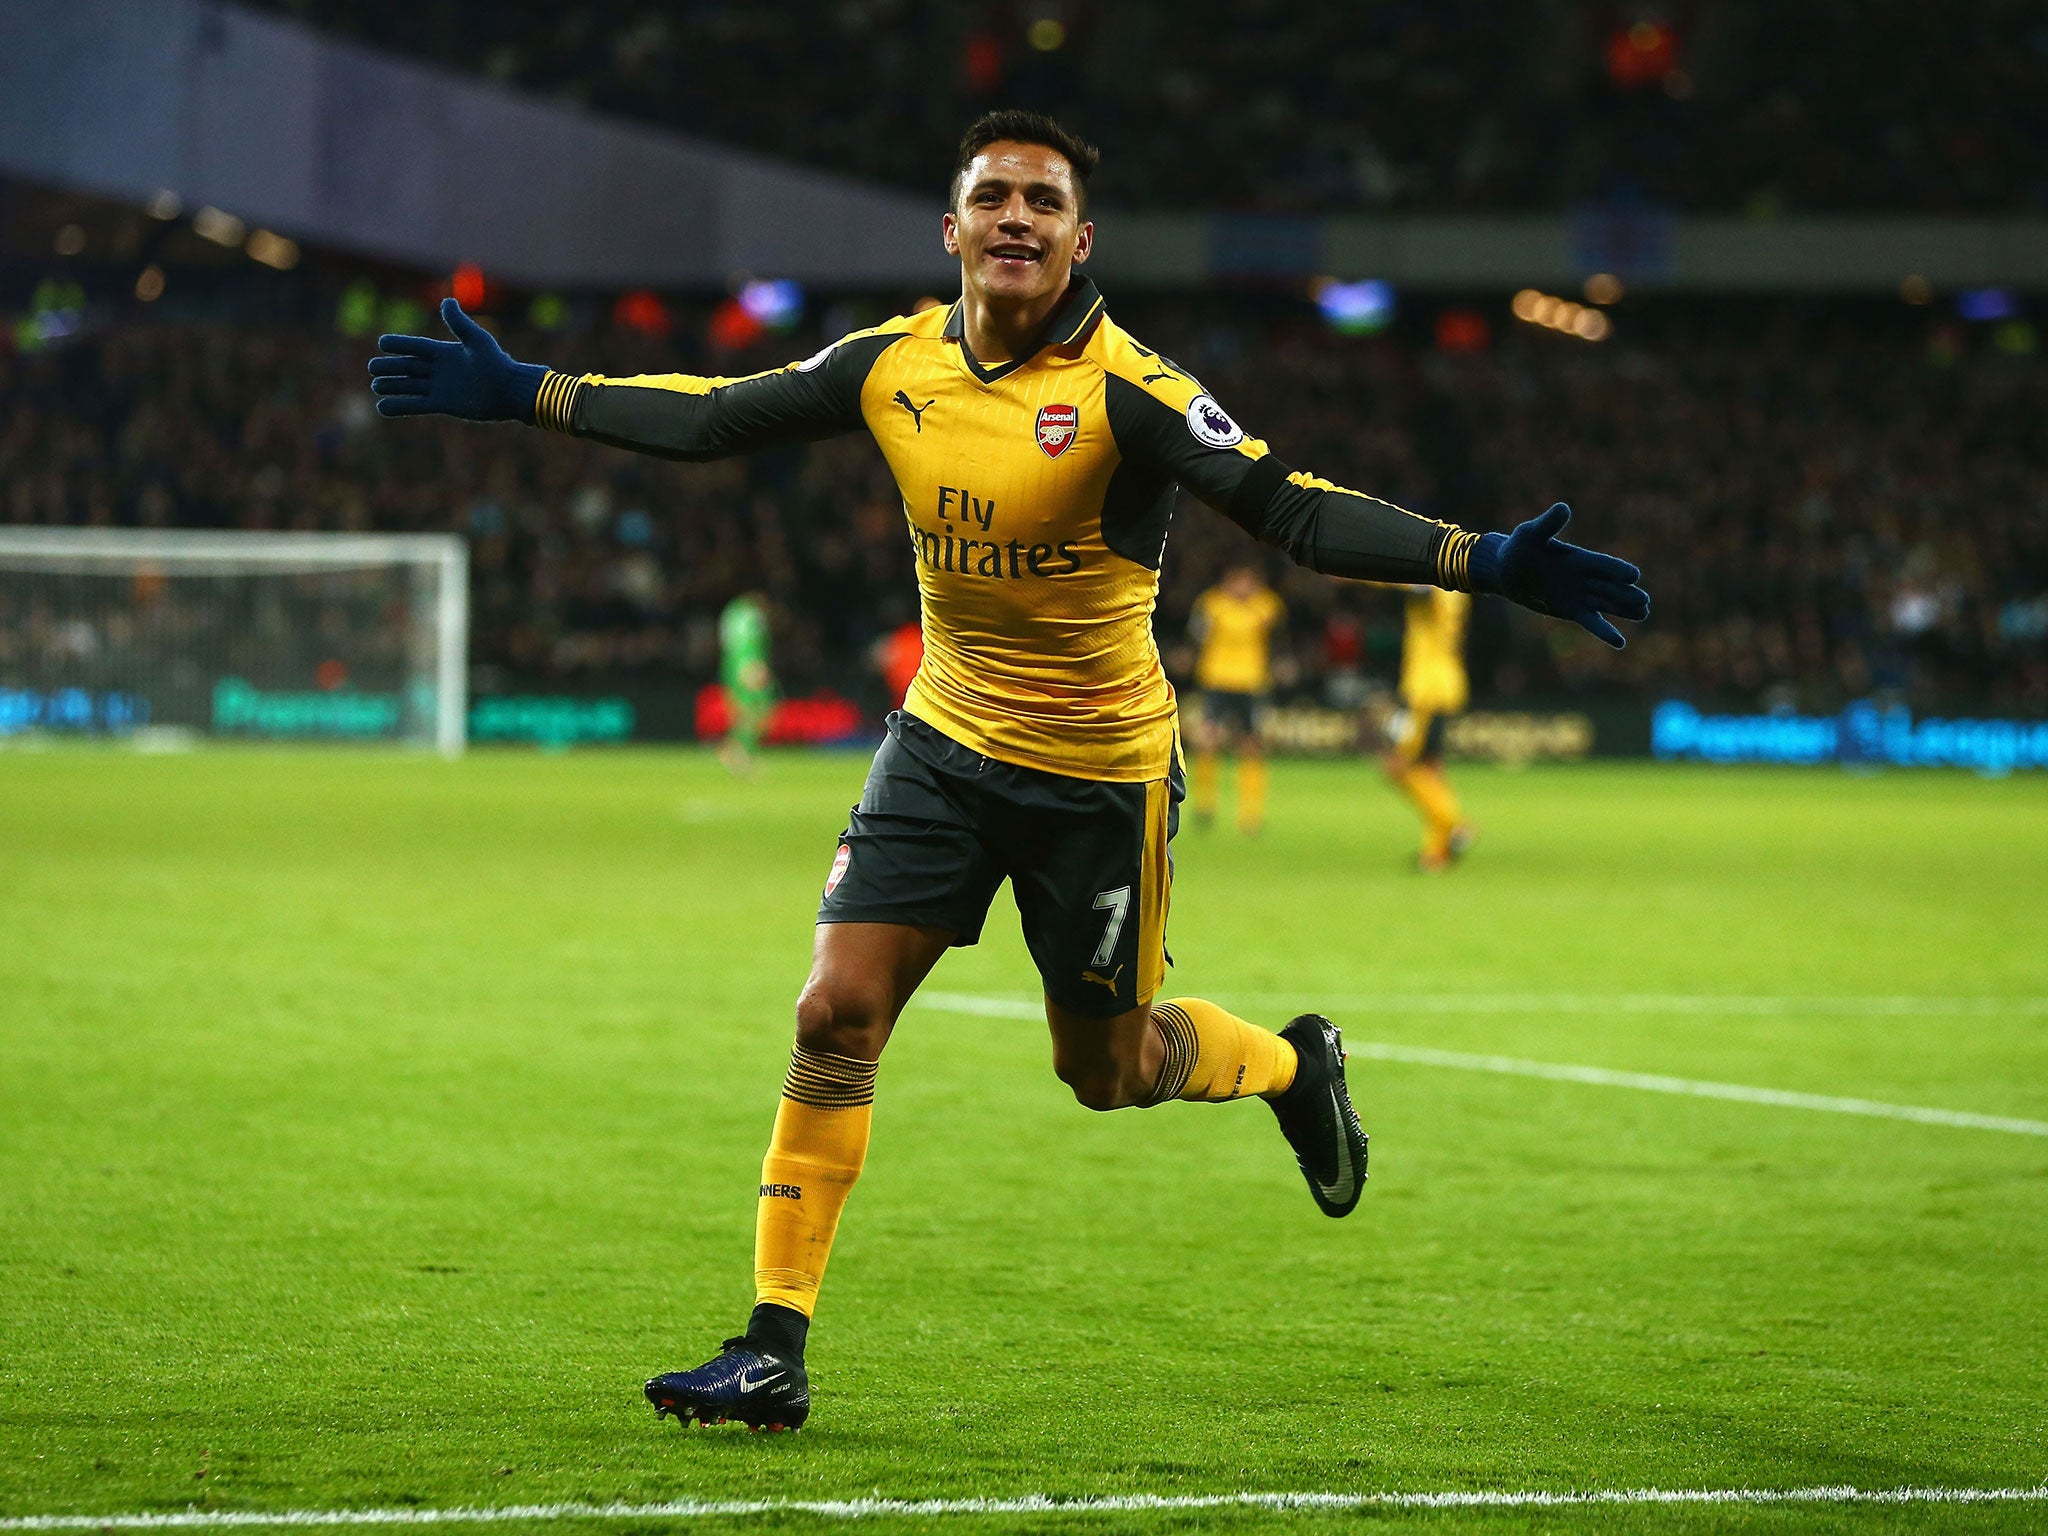 Sanchez has gone from strength to strength this season, firing the Gunners to impressive victories on both the domestic and European stage